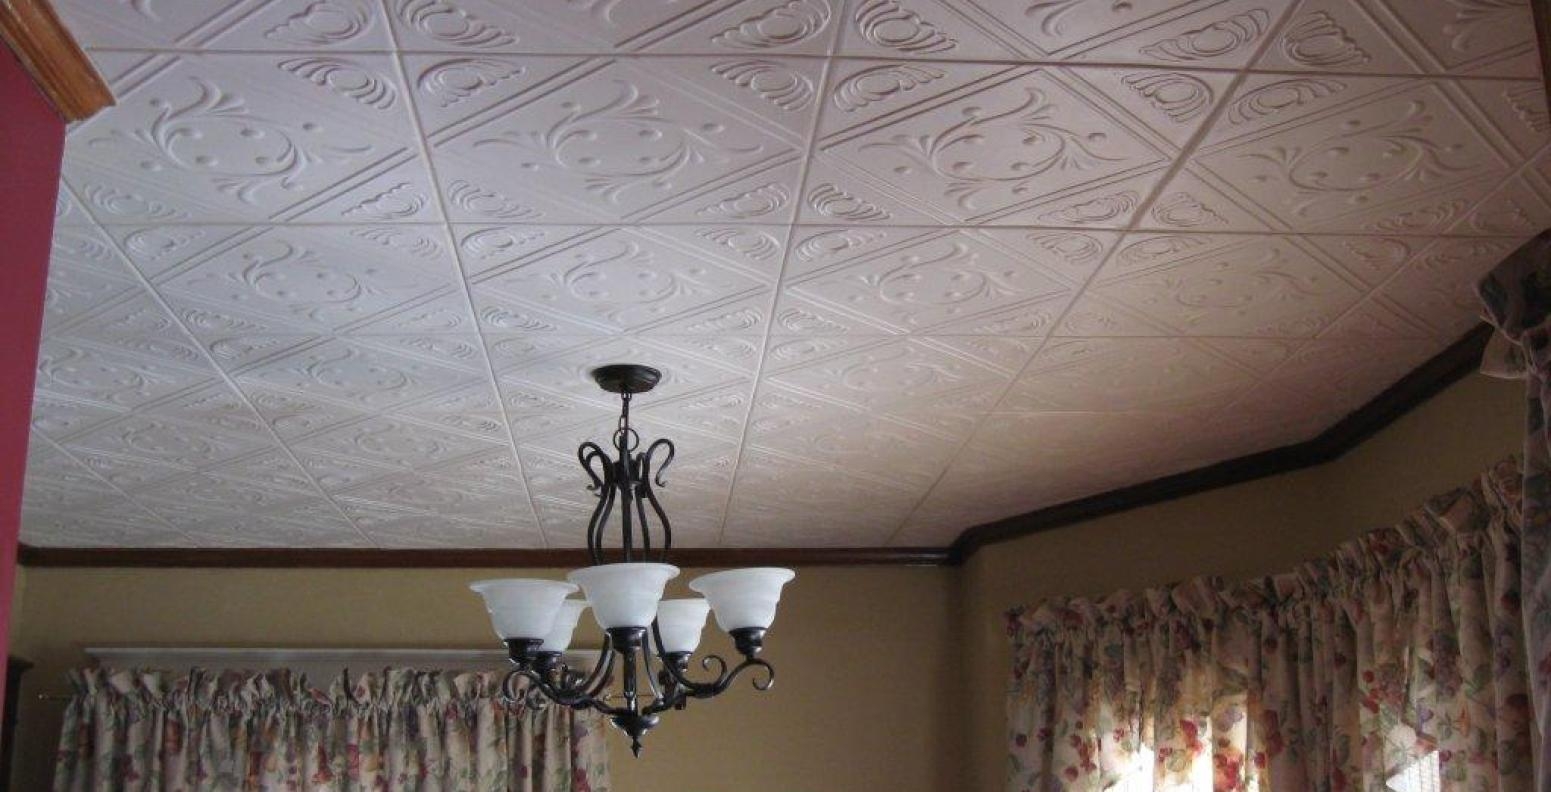 Decorating With Old Ceiling Tiles Decorating With Old Ceiling Tiles ceiling dropped ceiling tiles beautiful old ceiling tiles image 1551 X 792